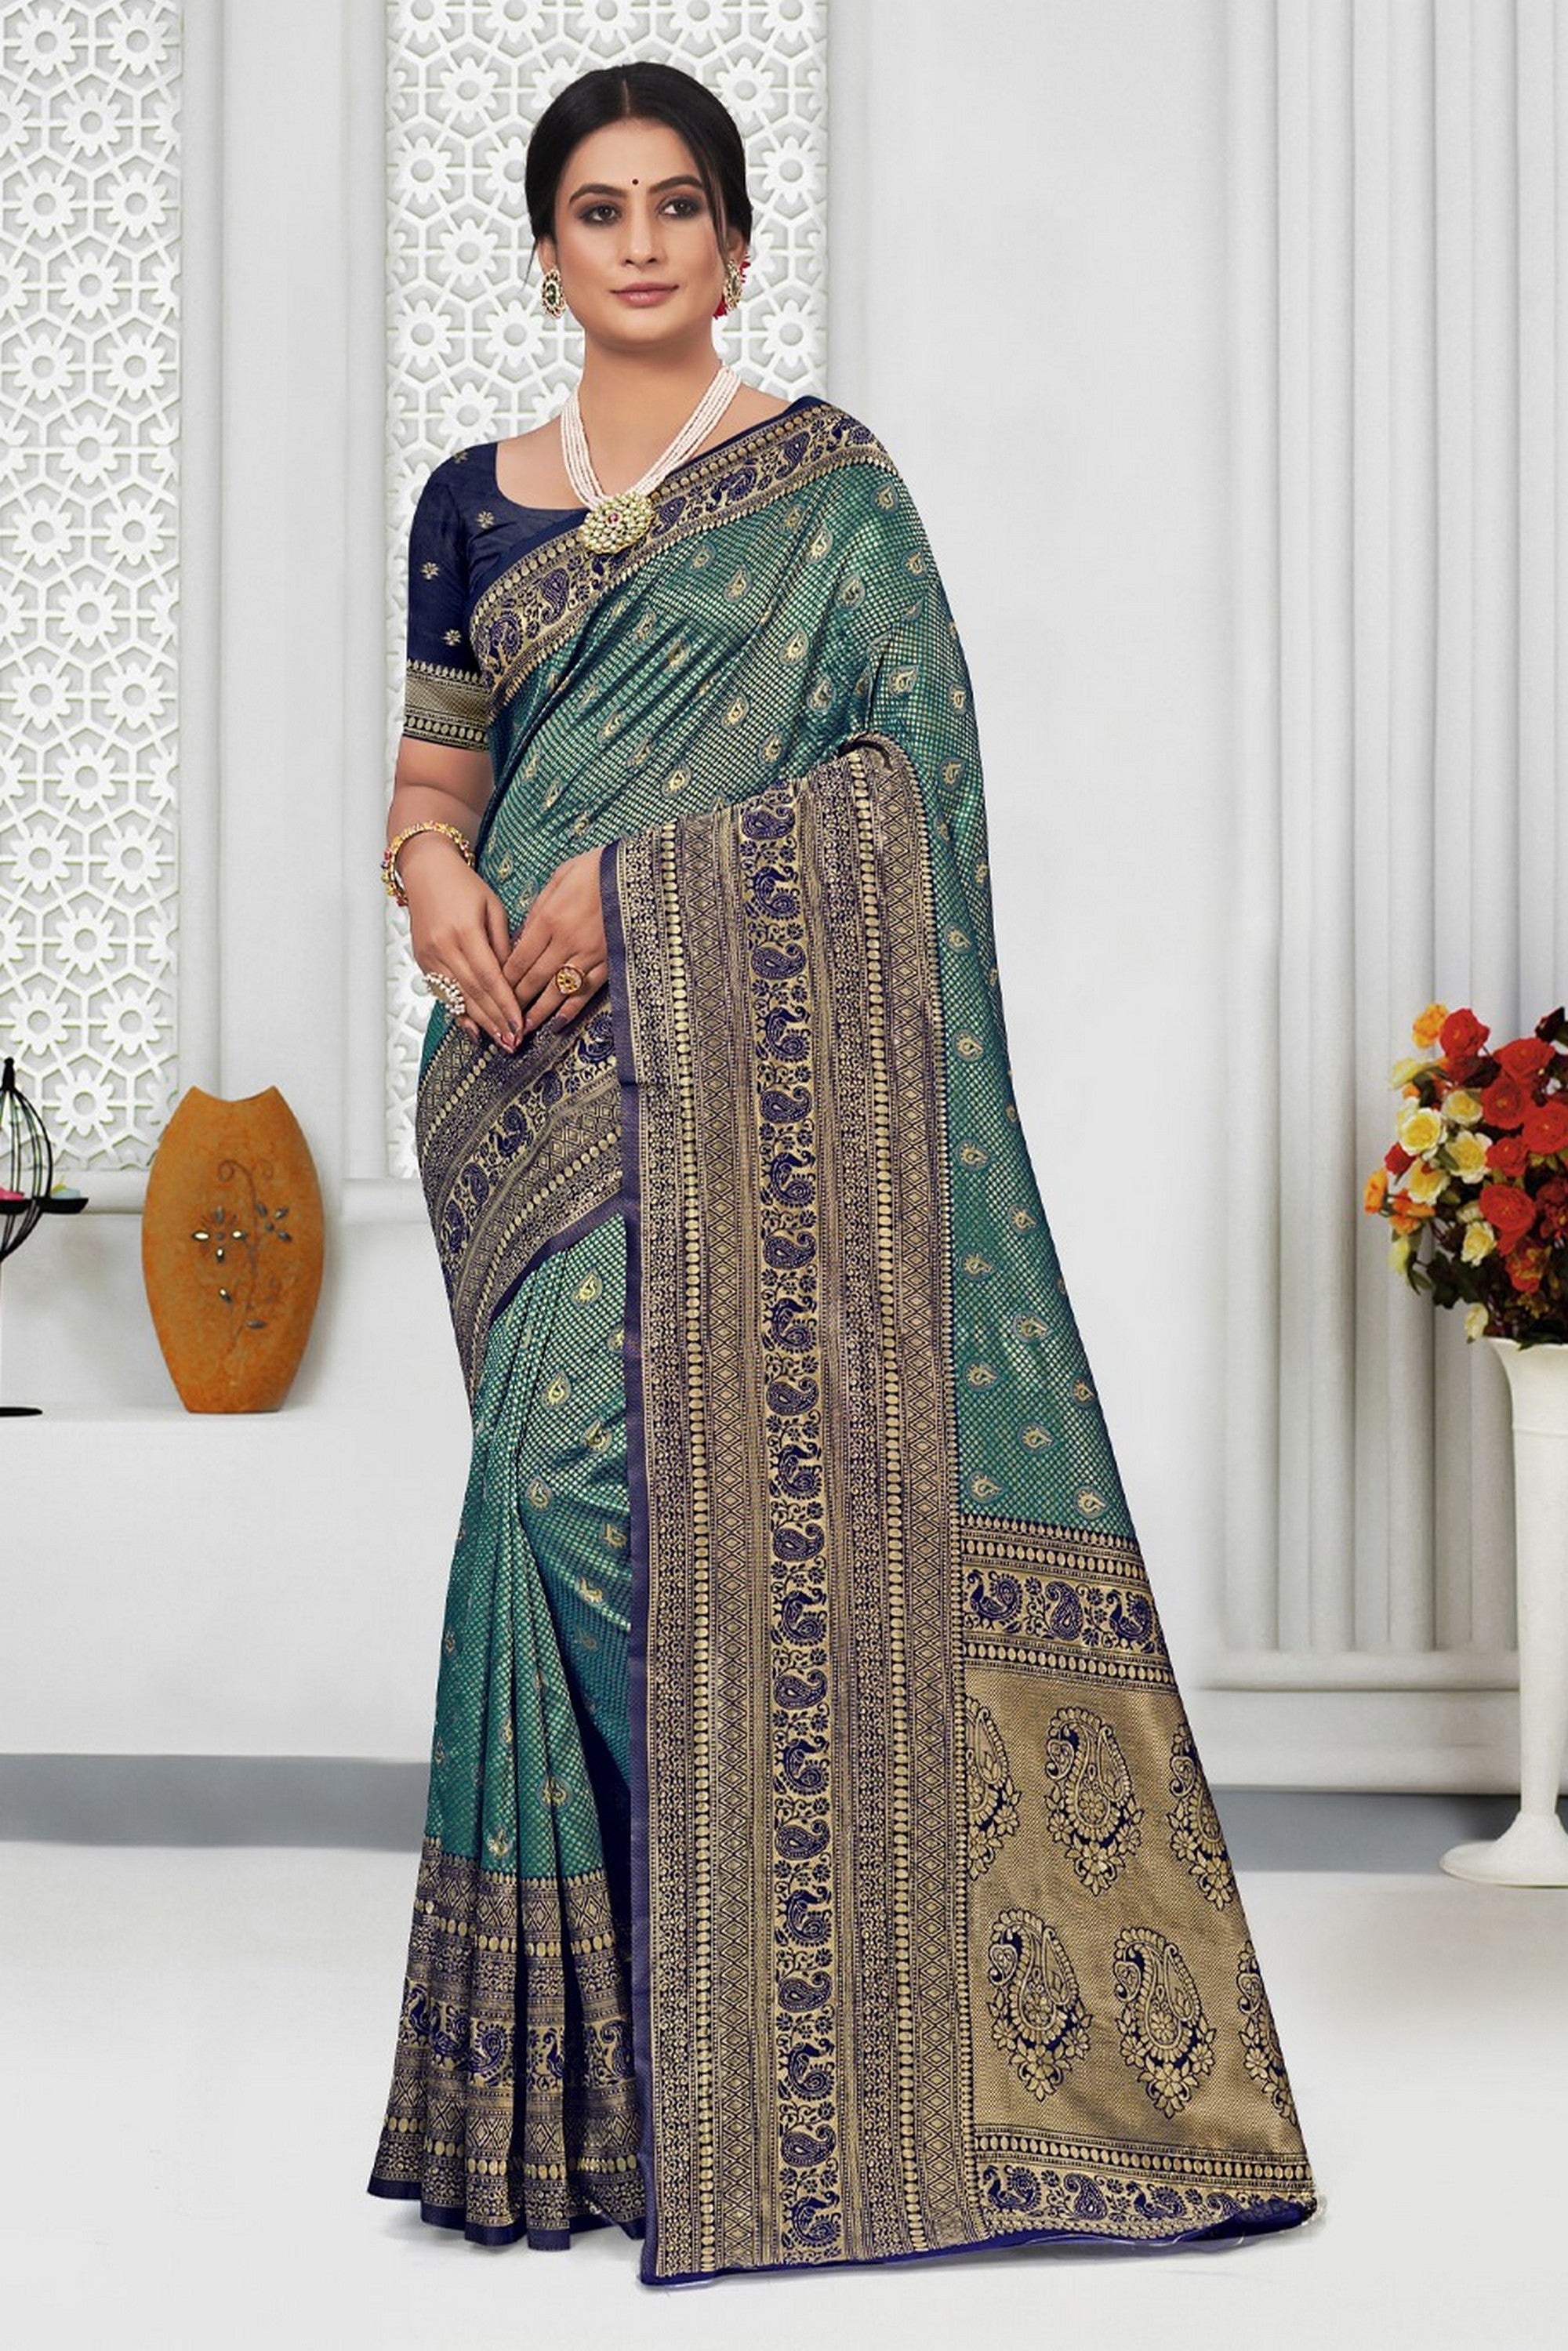 First and Finest - a legacy of fine silk sarees since 1928